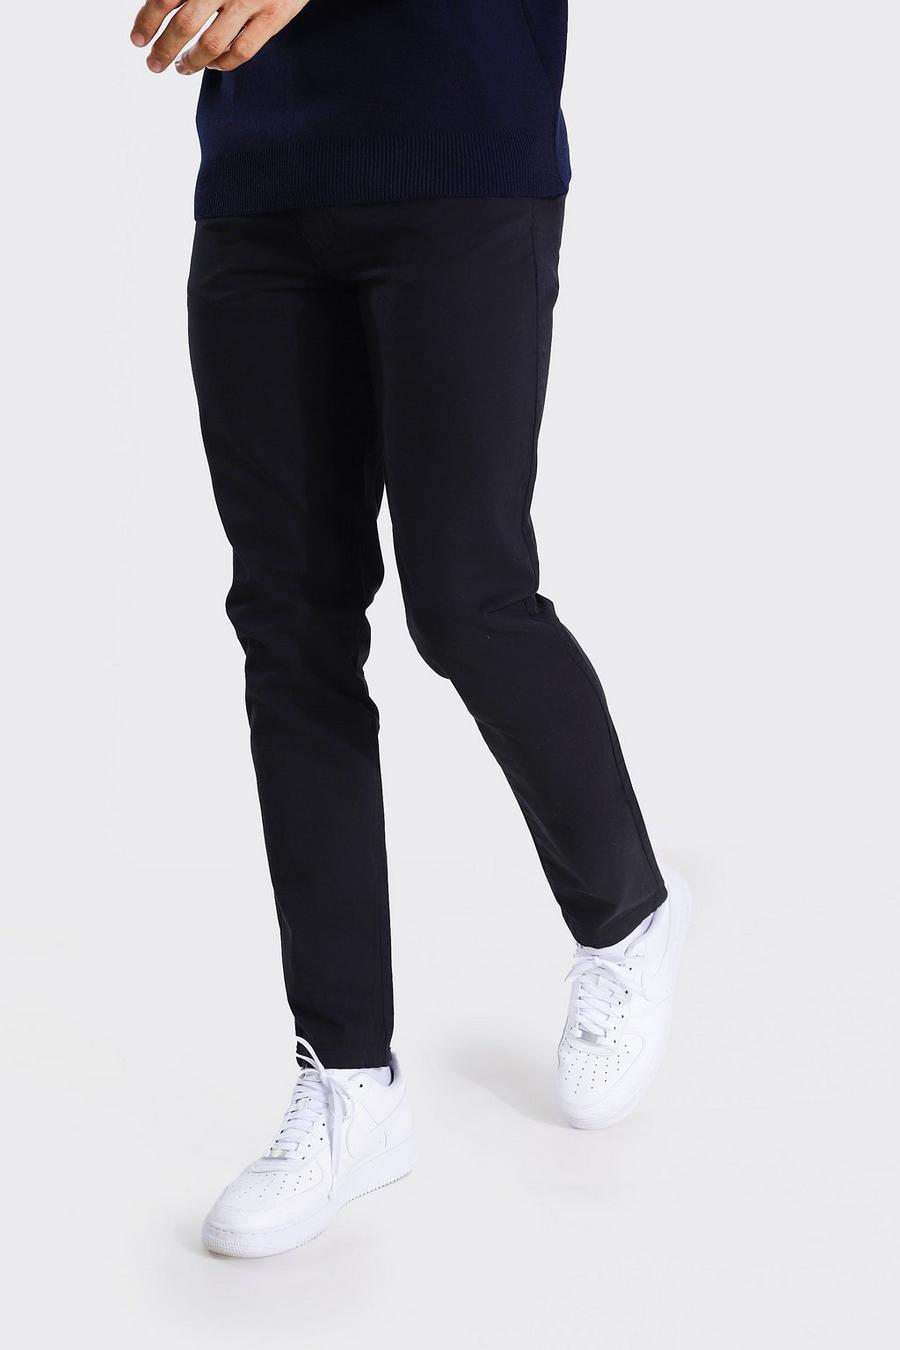 Black Tall Slim Fit Chino Pants image number 1